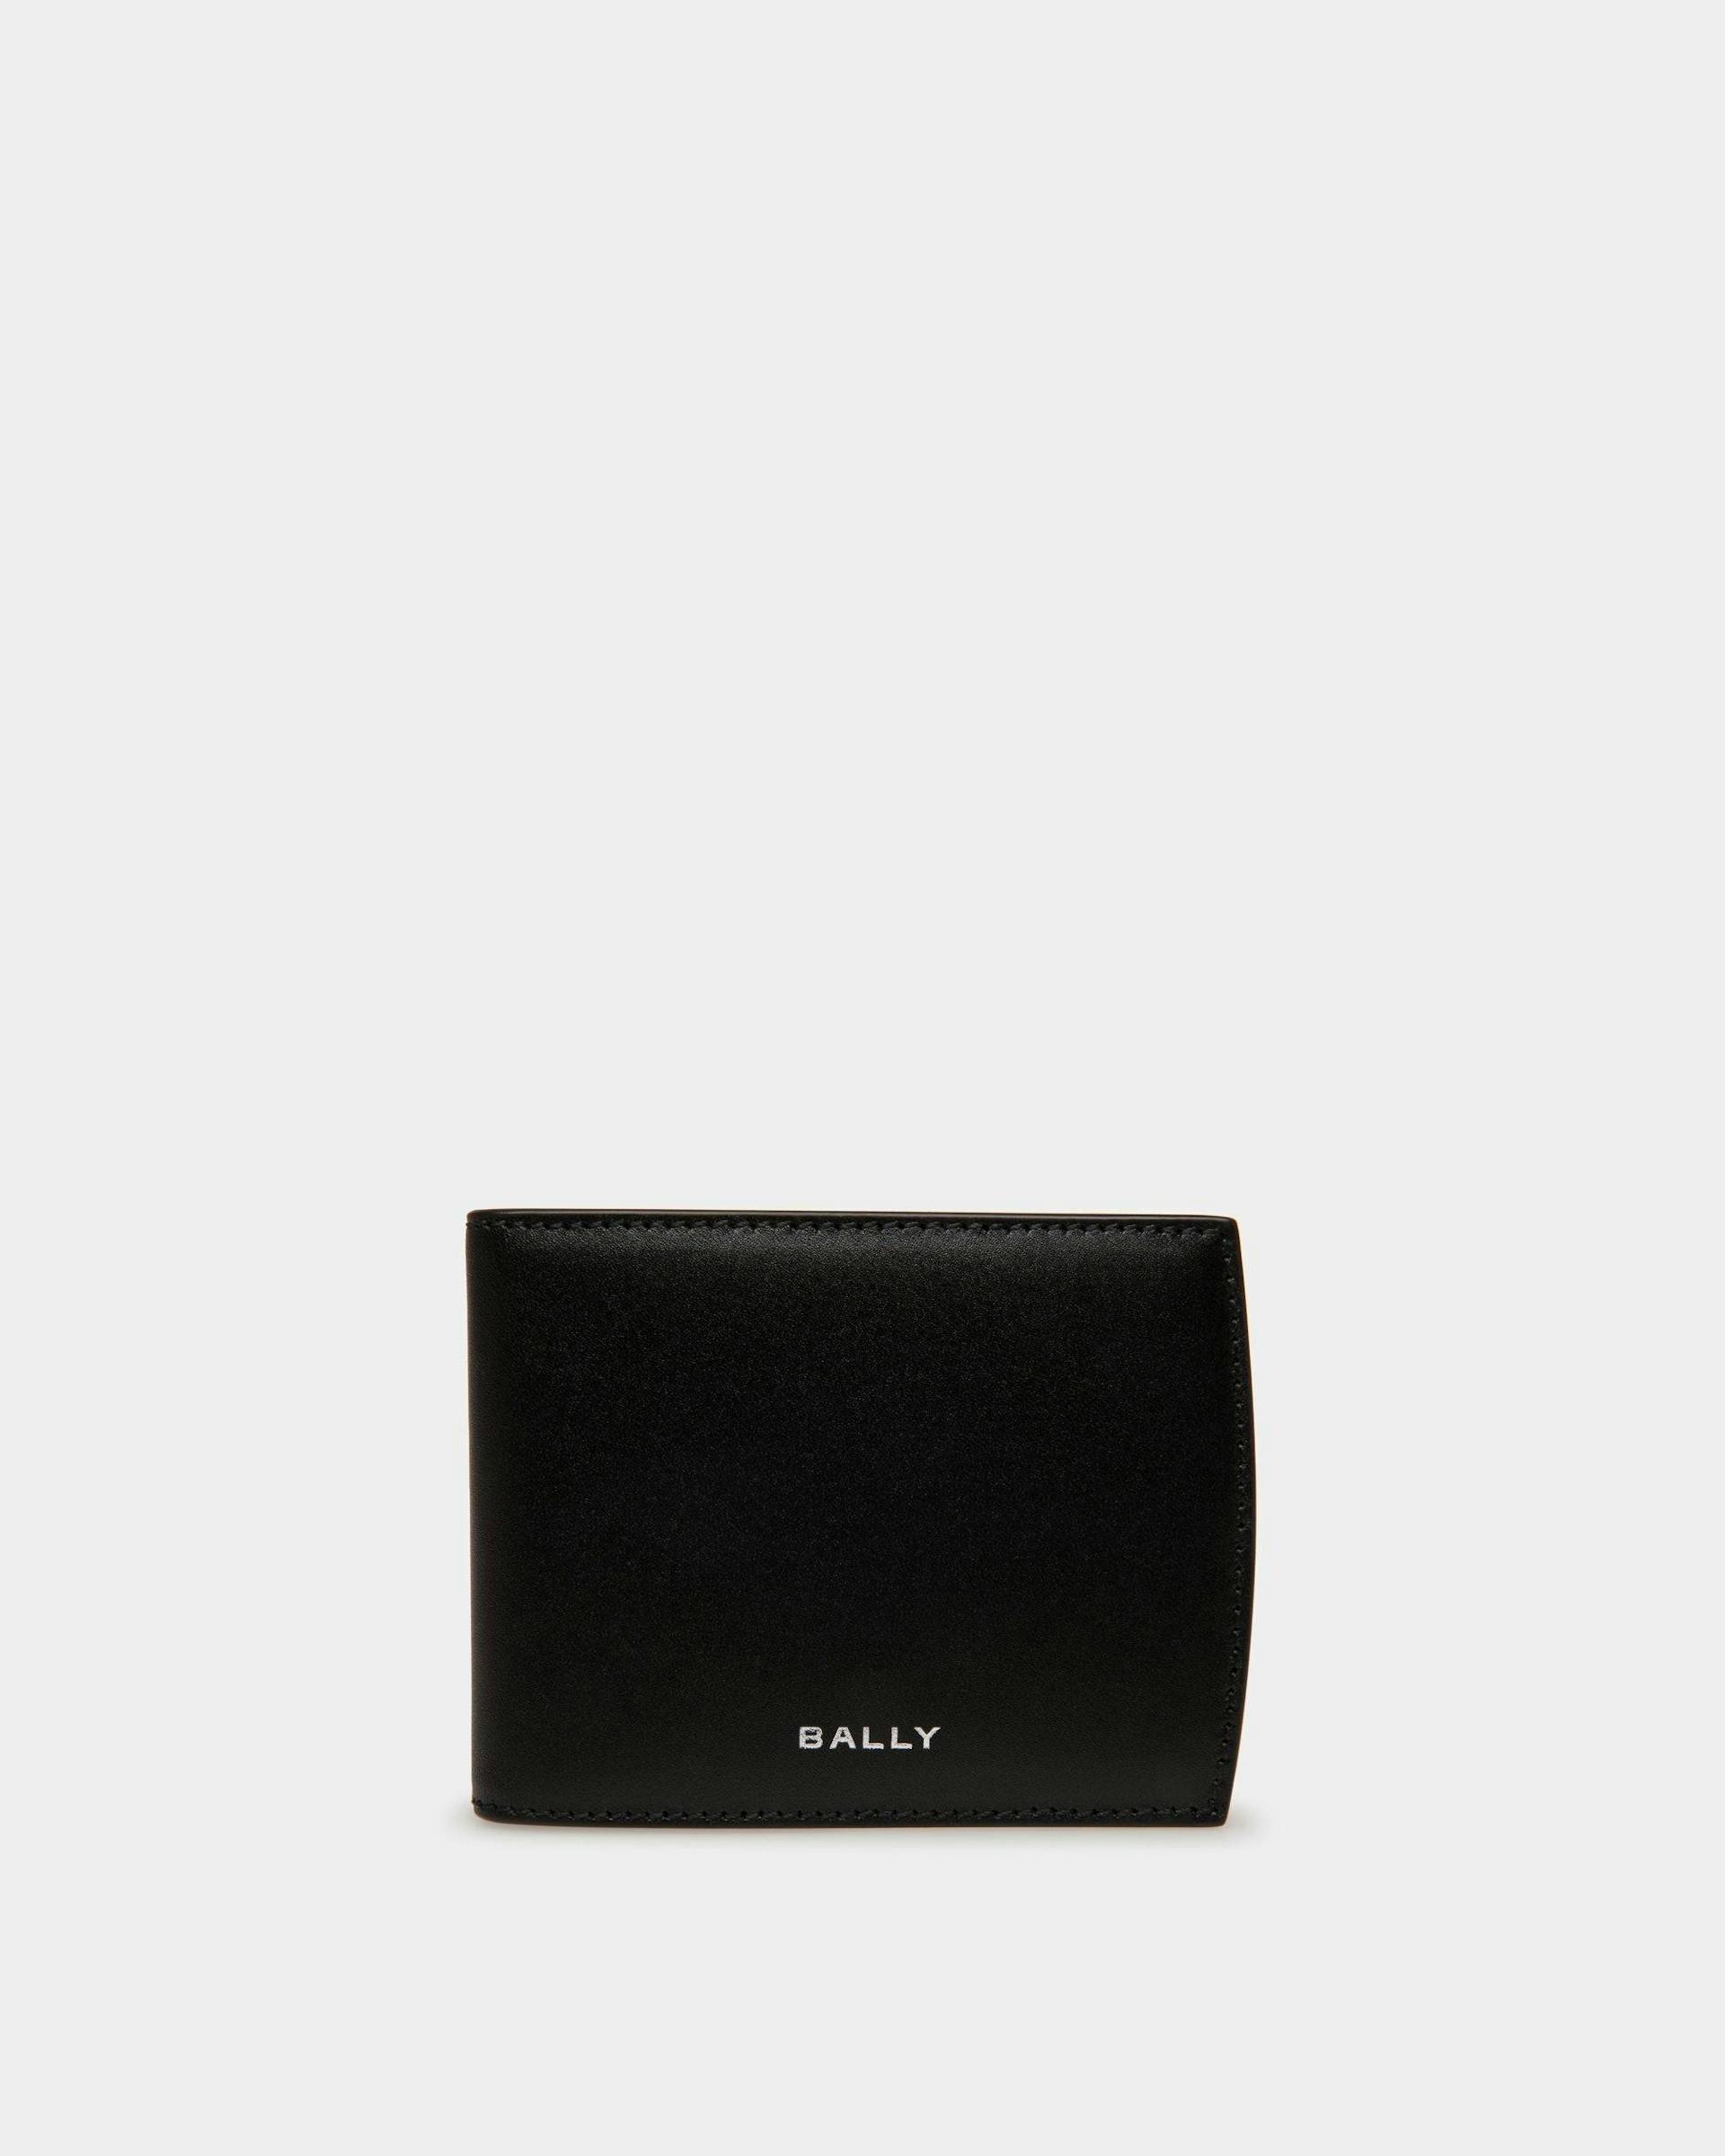 Men's Busy Bally Bifold Wallet in Black Leather | Bally | Still Life Front